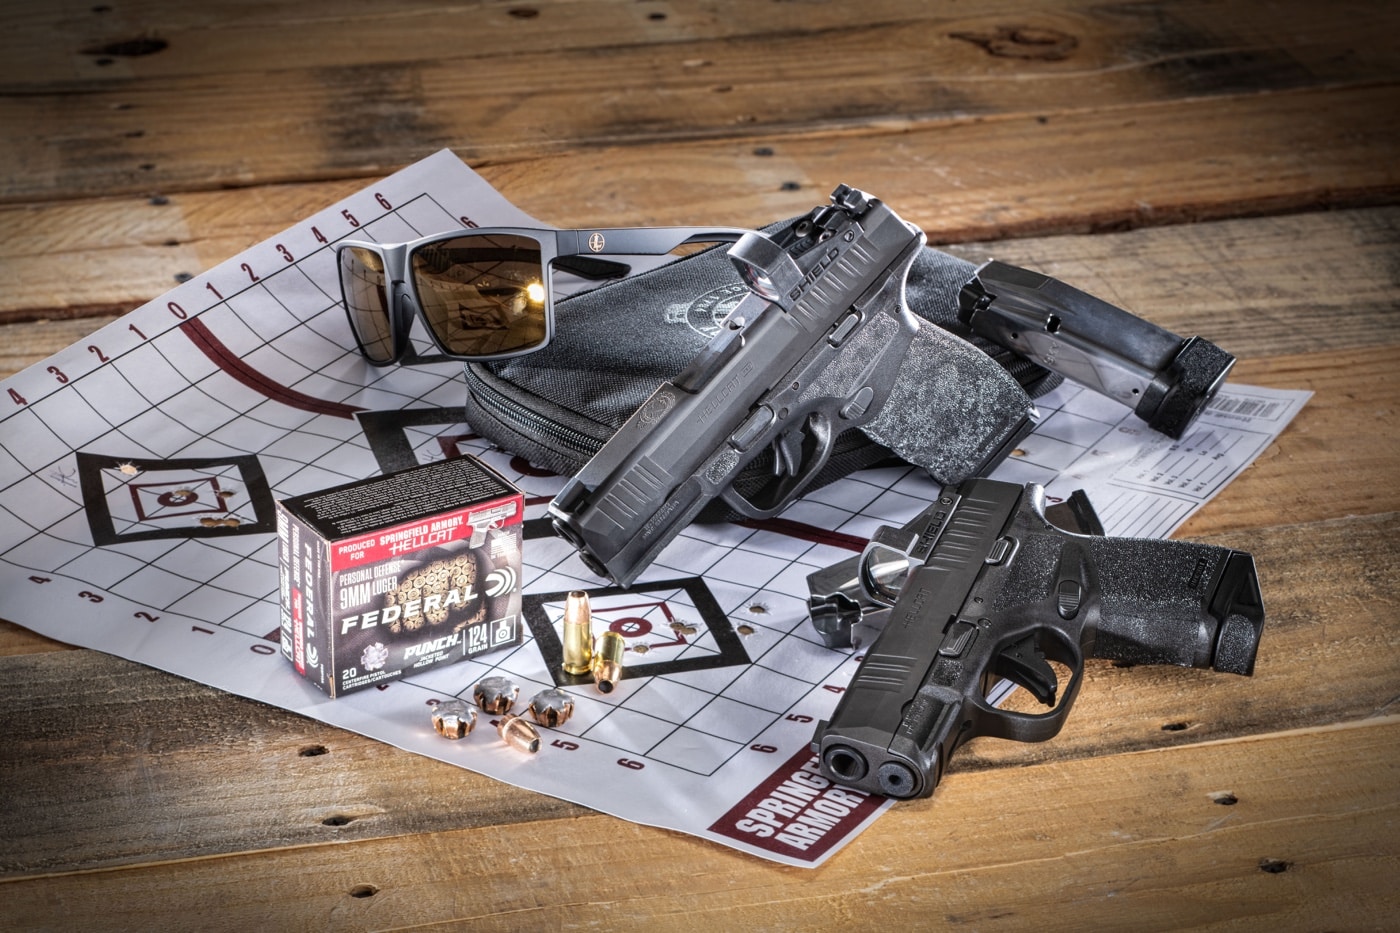 In this photo, the author of the article has arranged a Springfield Hellcat and Hellcat Pro with a scored target, ammunition, a soft sided care, a gun magazine and eye protection glasses that look like sunglasses.